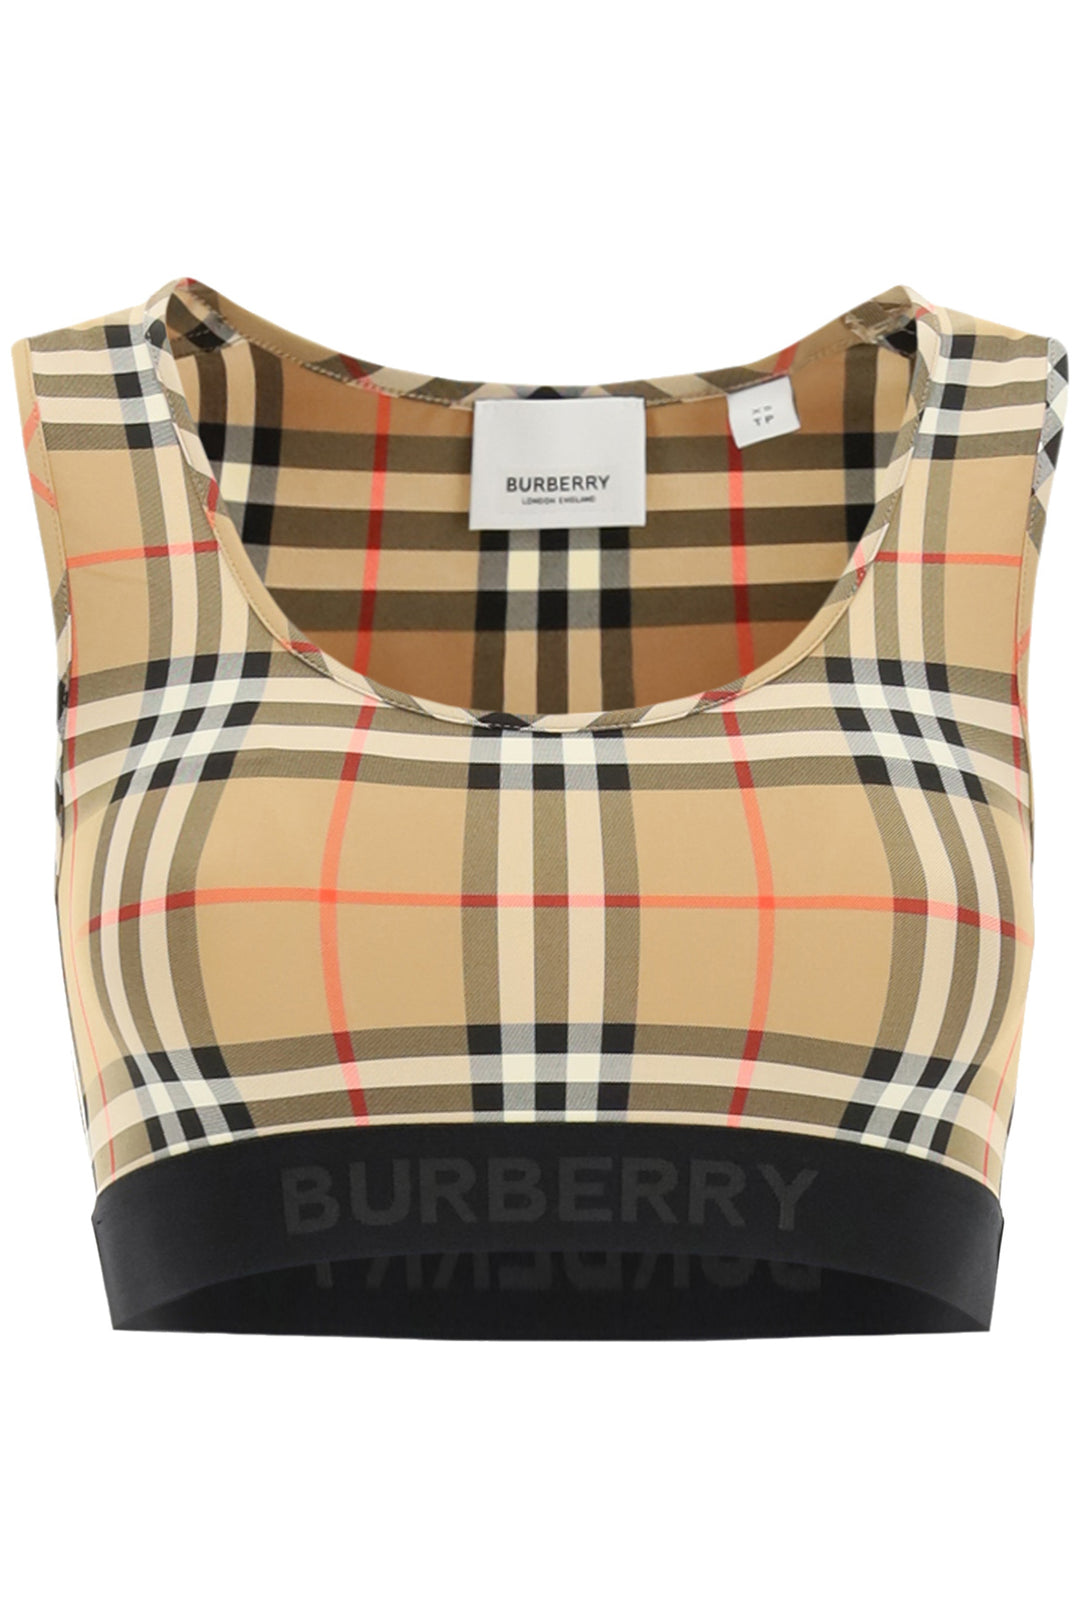 Burberry Dalby Check Sport Top   Beige